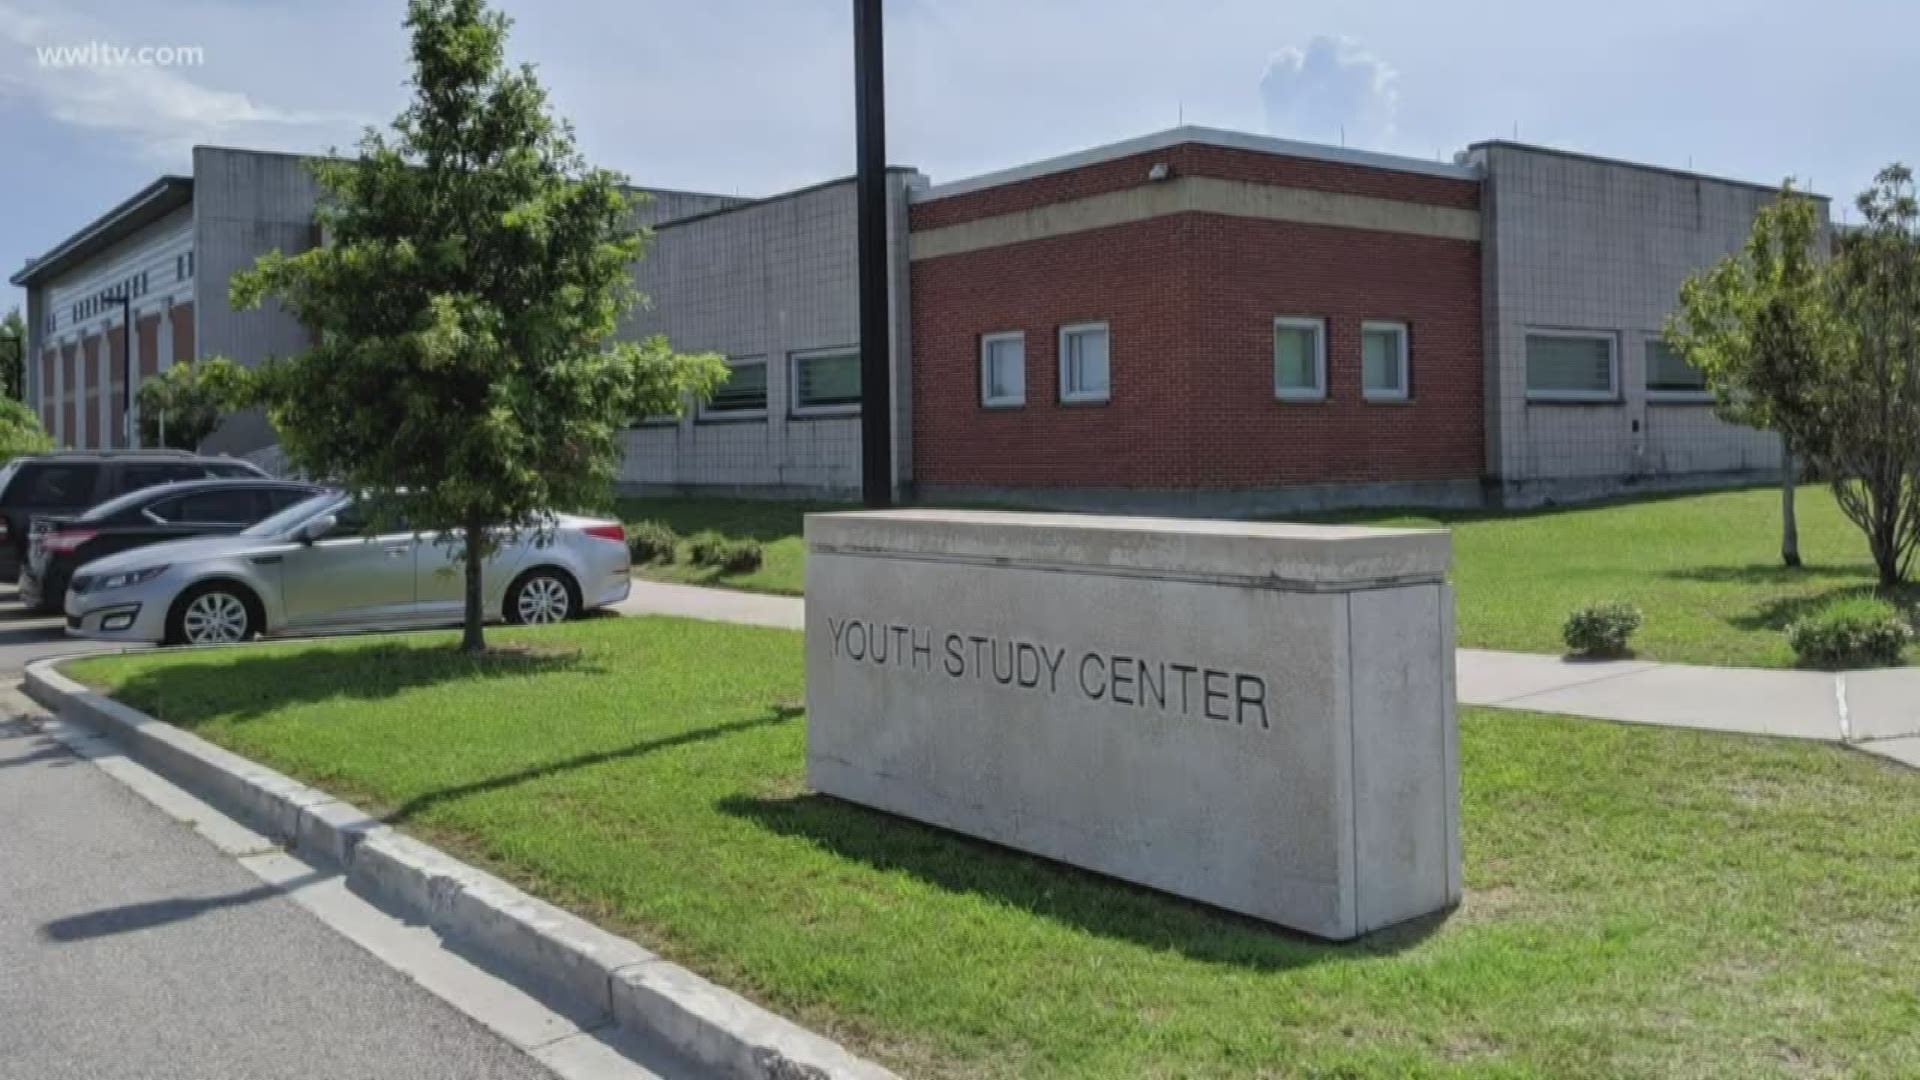 A police report detailing a lockdown at New Orleans’ juvenile jail last week sheds some new light on what happened, a week after Mayor LaToya Cantrell and District Attorney Leon Cannizzaro clashed over how serious the incident was.